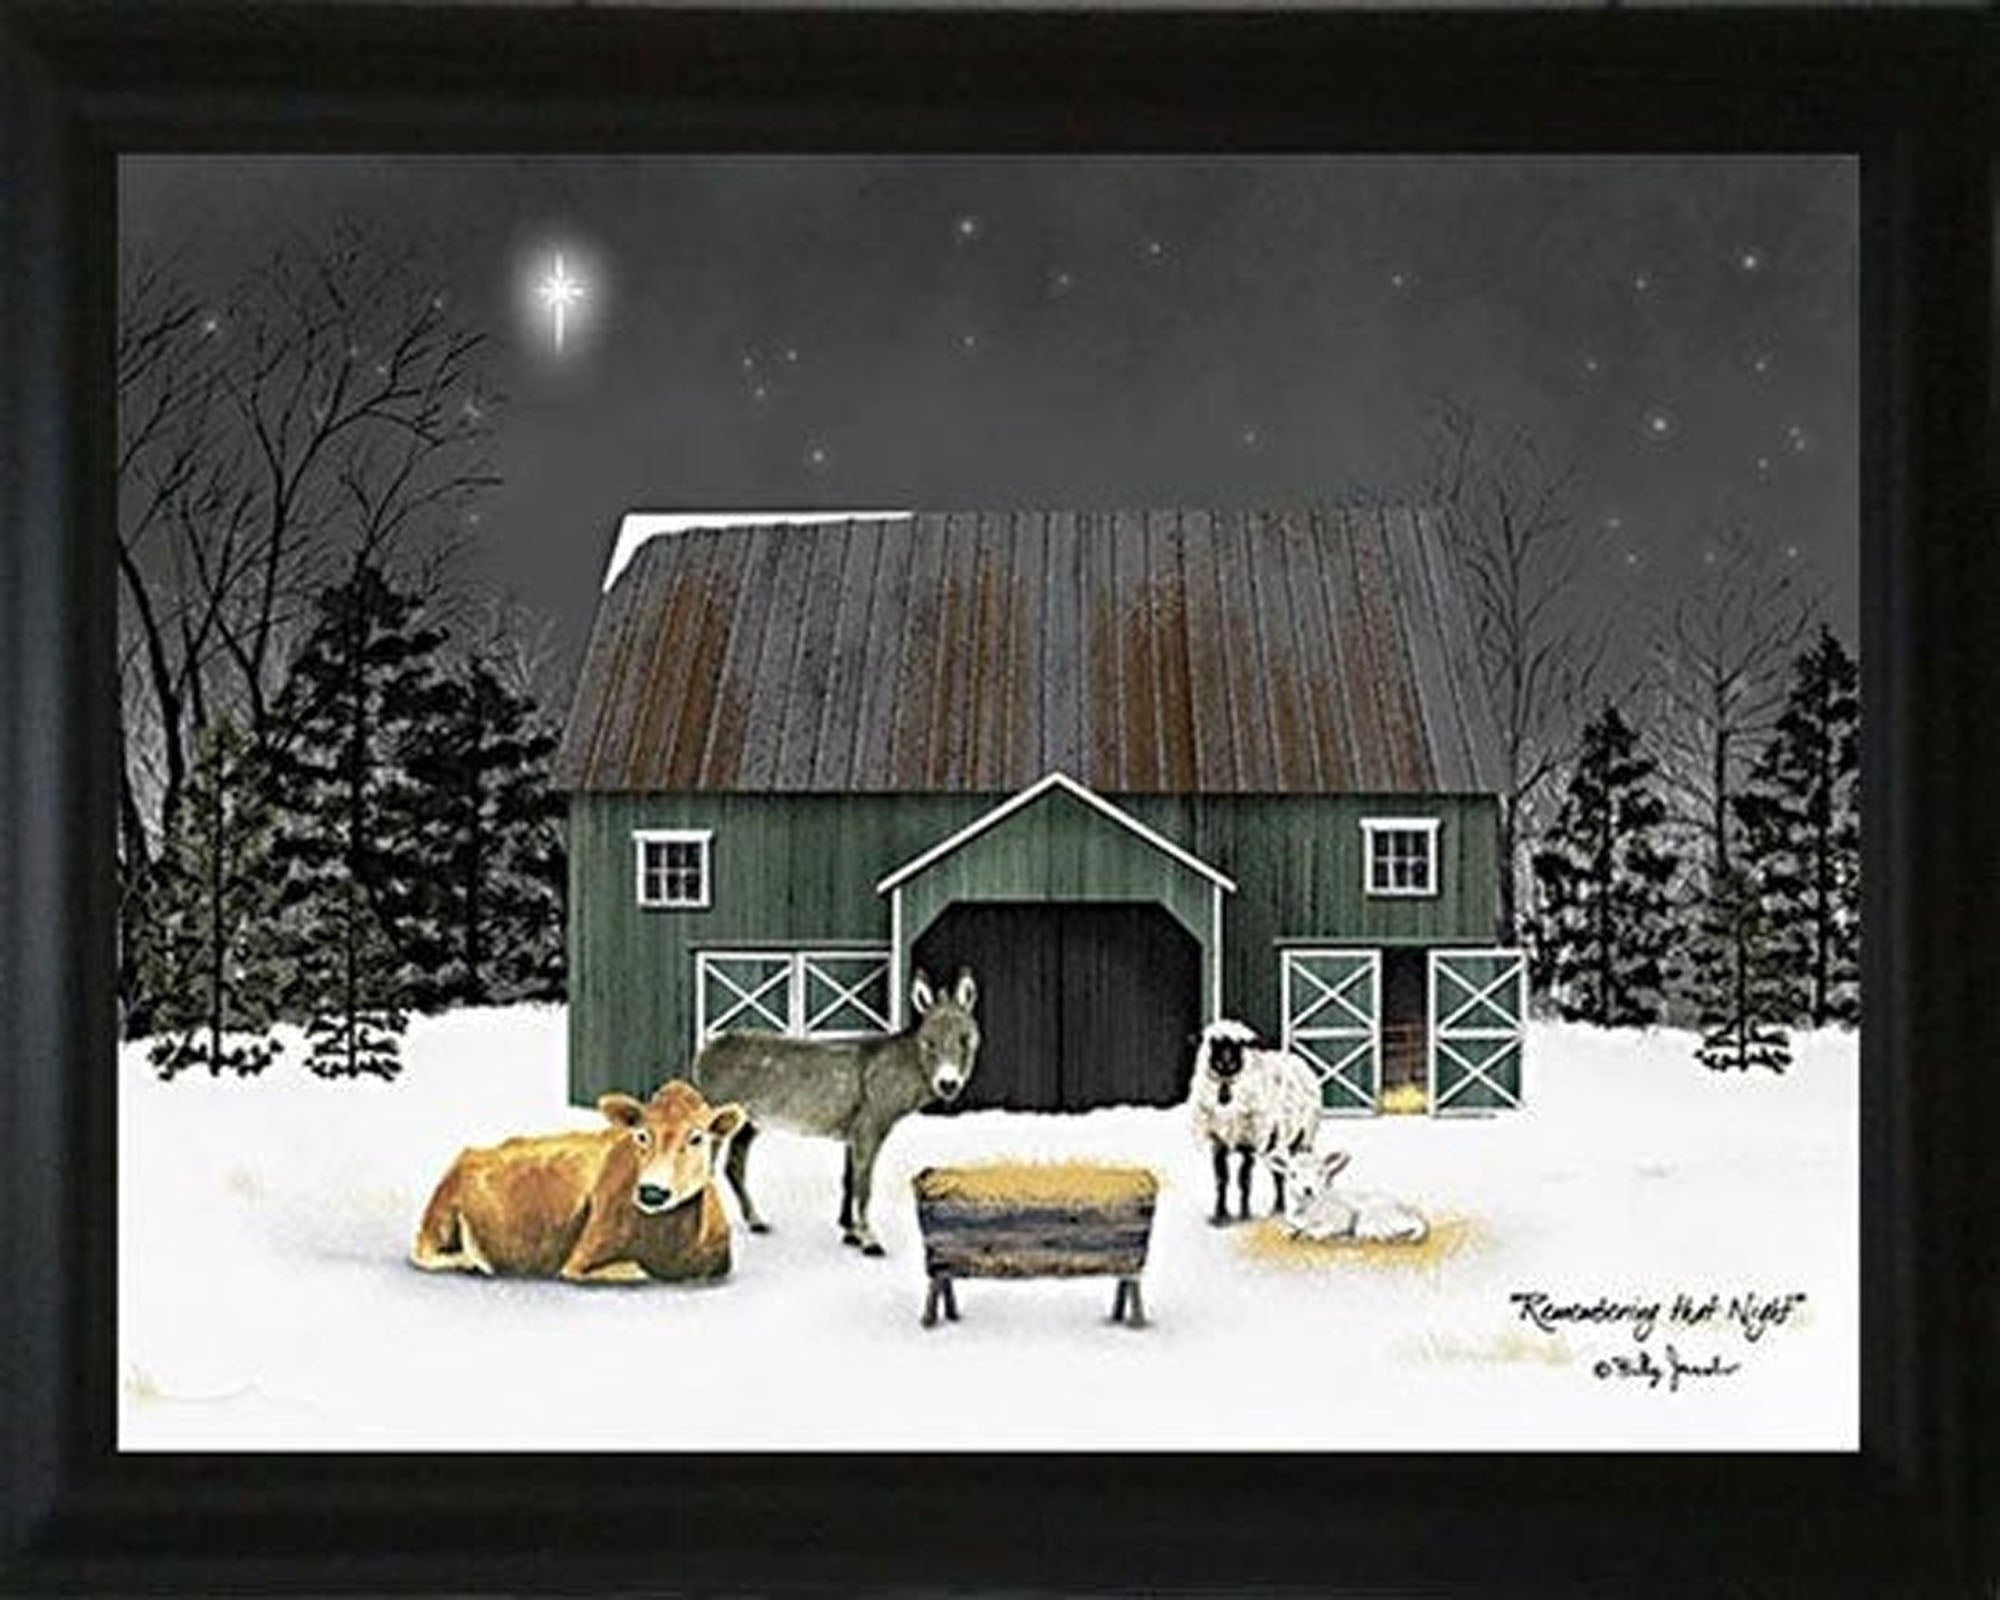 Remembering The Night - Billy Jacobs 15.5" x 19.5" Framed Art